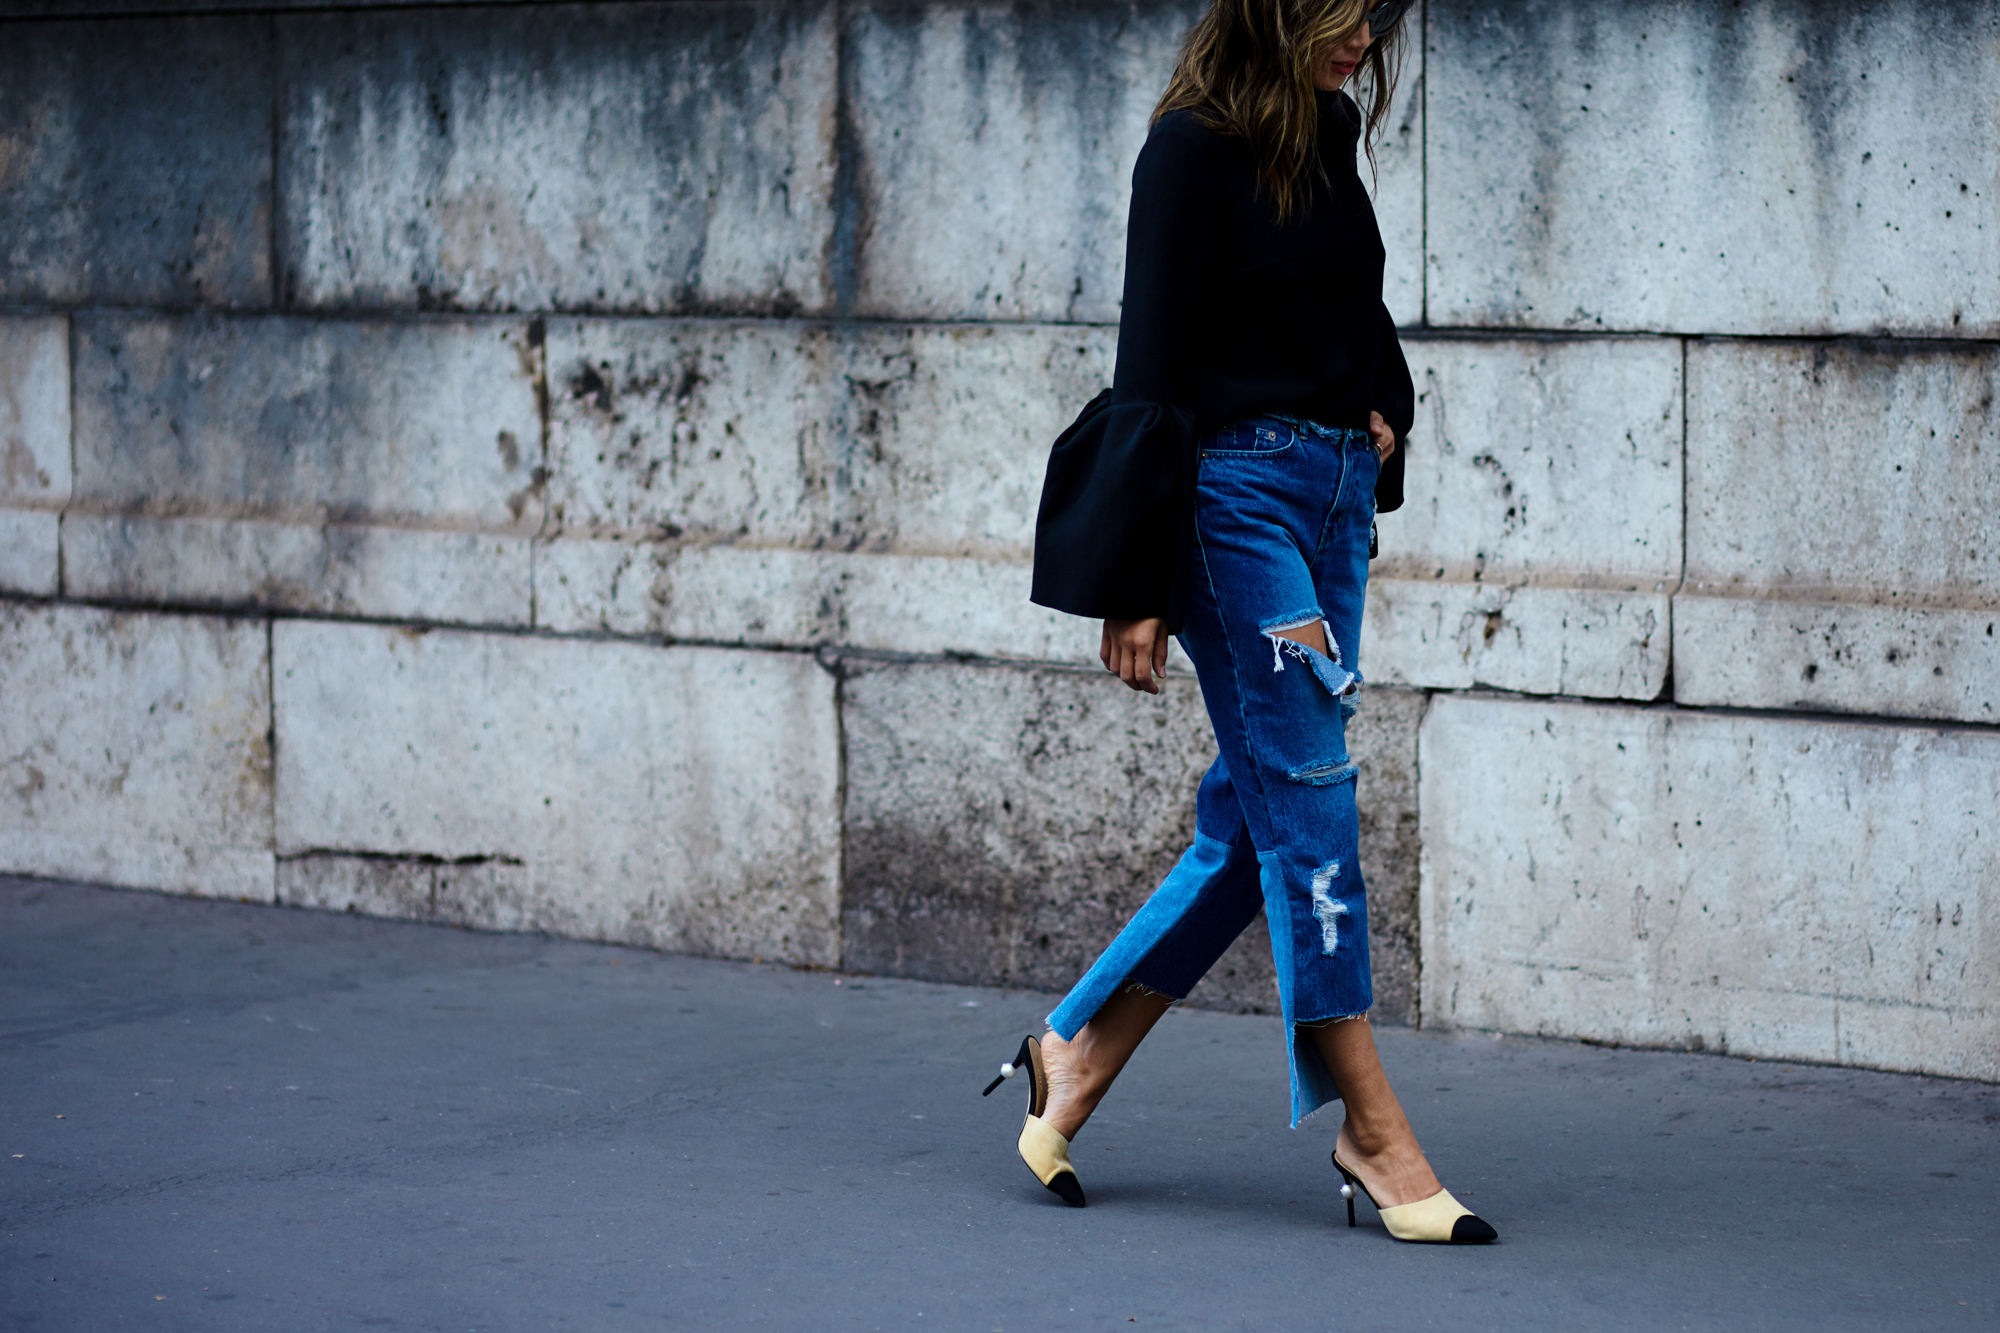 PFW Spring-Summer 2017 Street Style: Blogger Aimee Song wearing a bell-sleeved top, jeans and Chanel mules after a fashion show in Paris, France